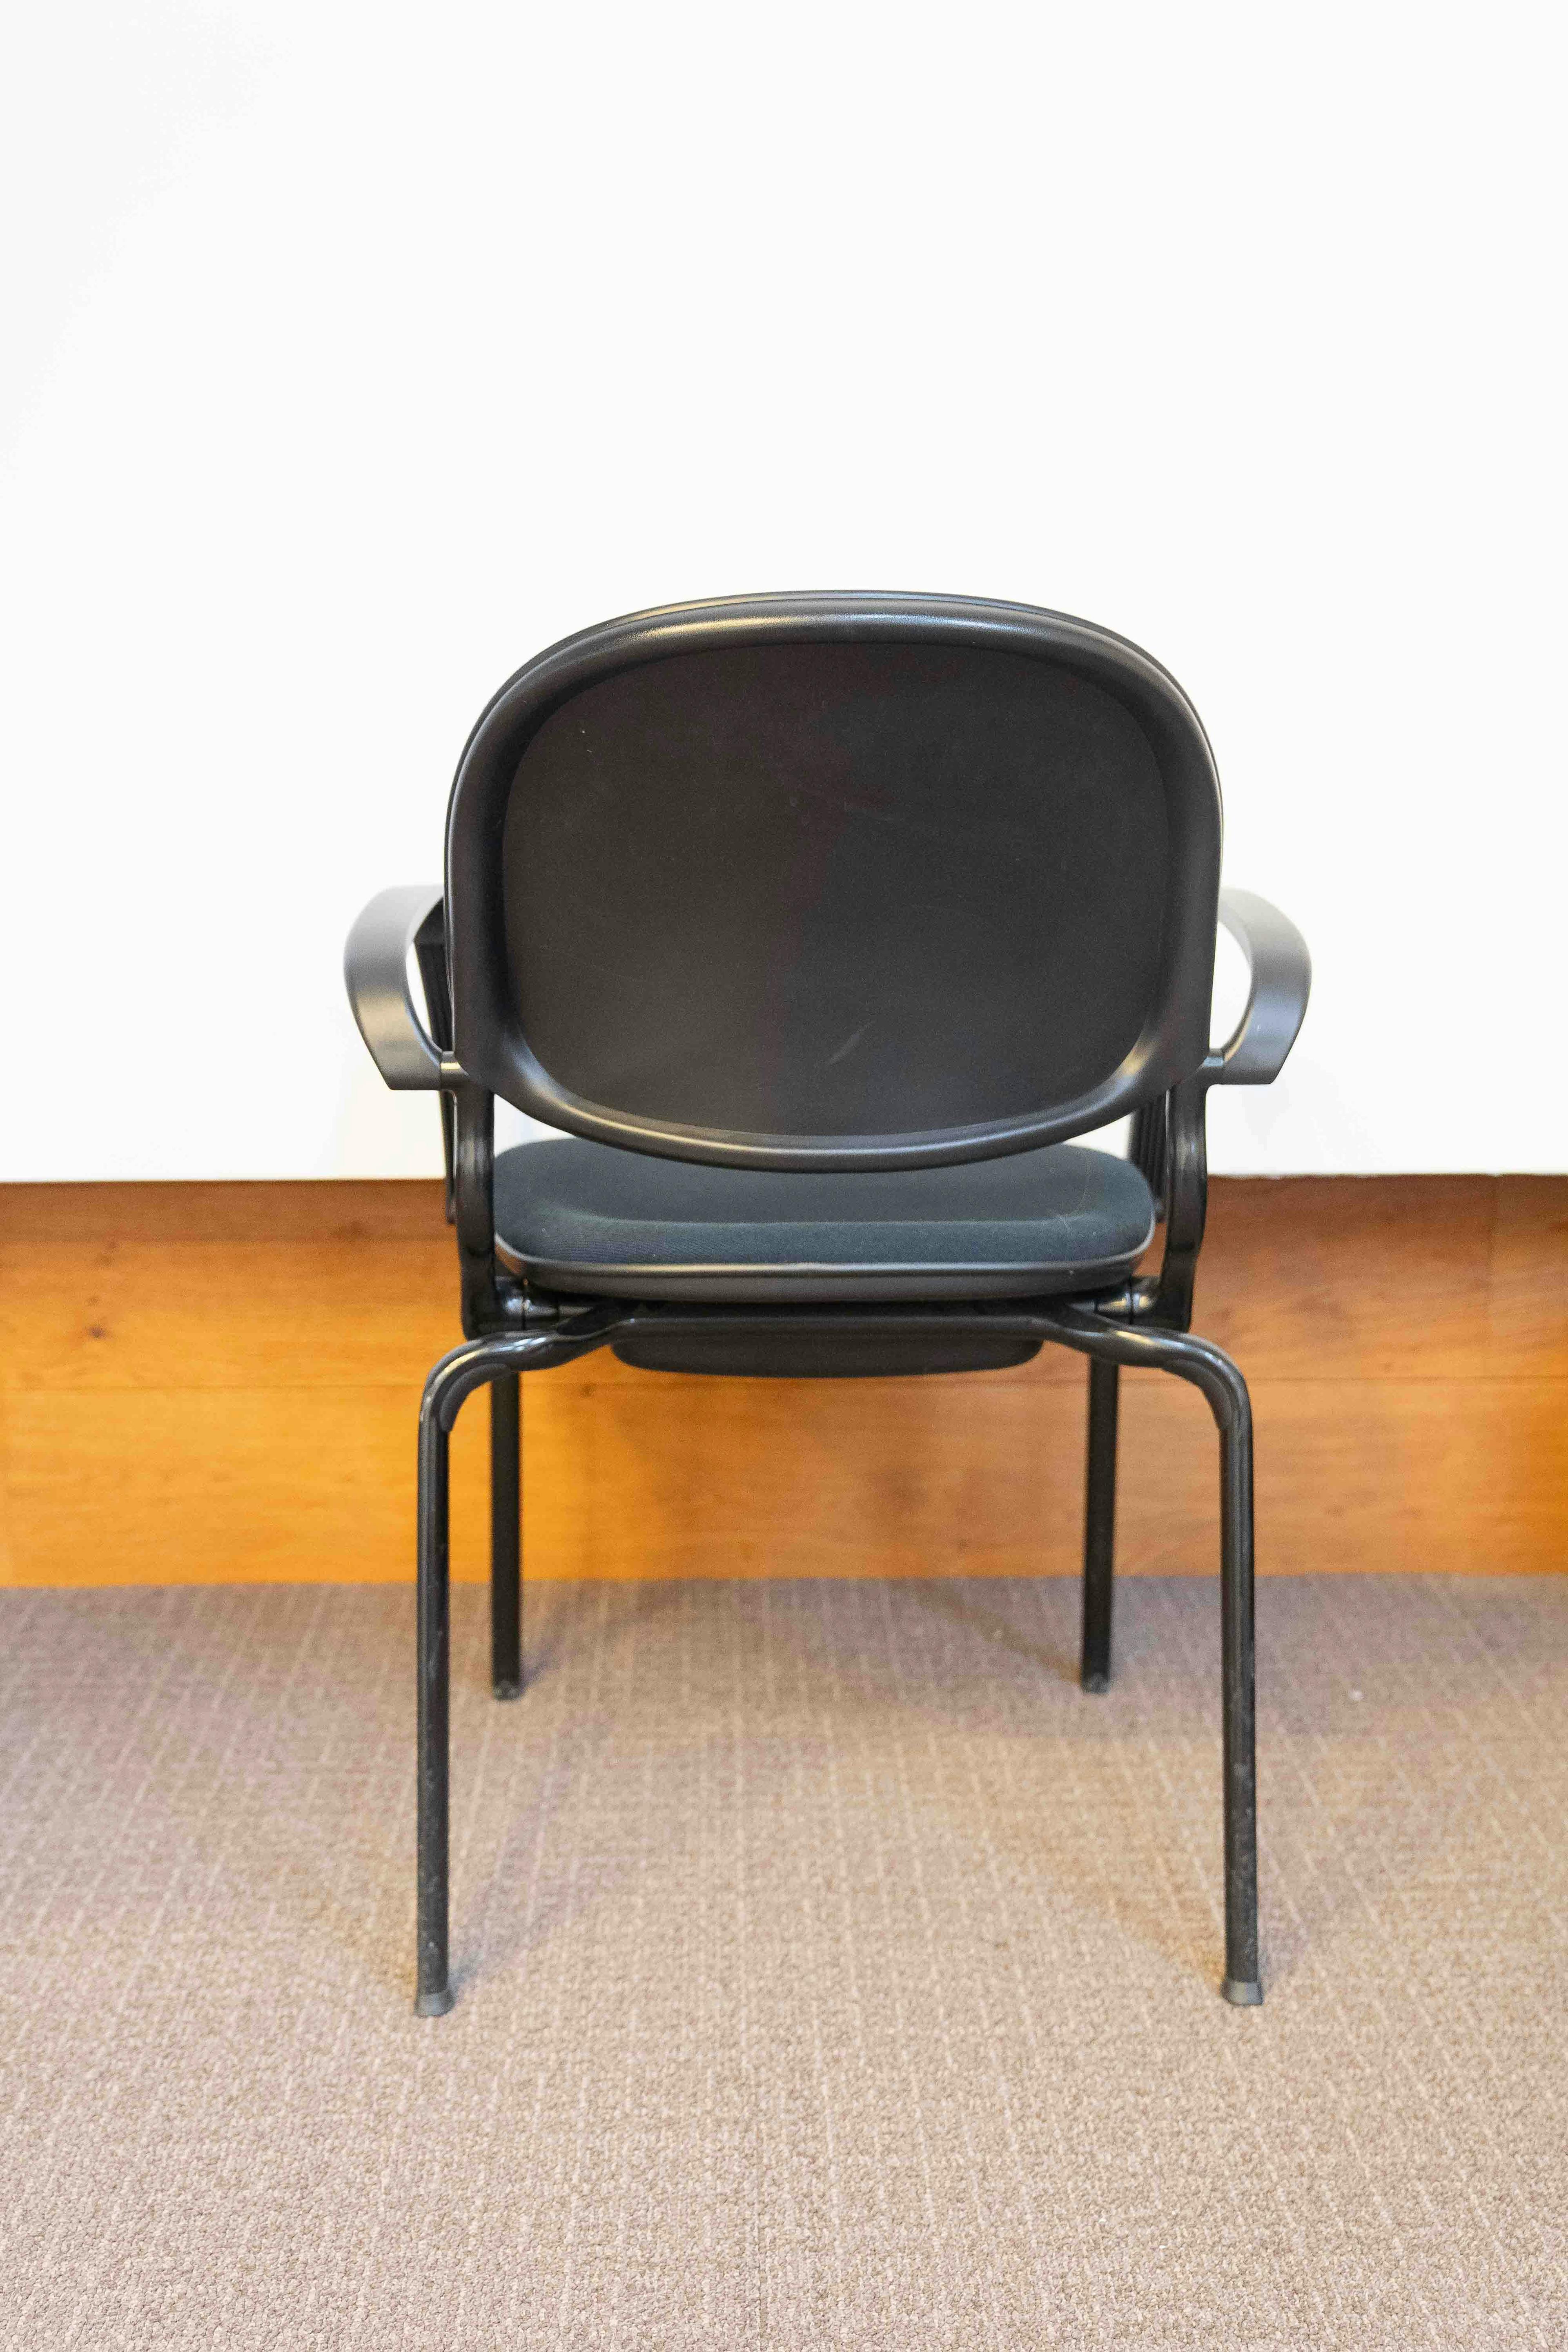 Comforto black cushion Meeting chair - Second hand quality "Chairs" - Relieve Furniture